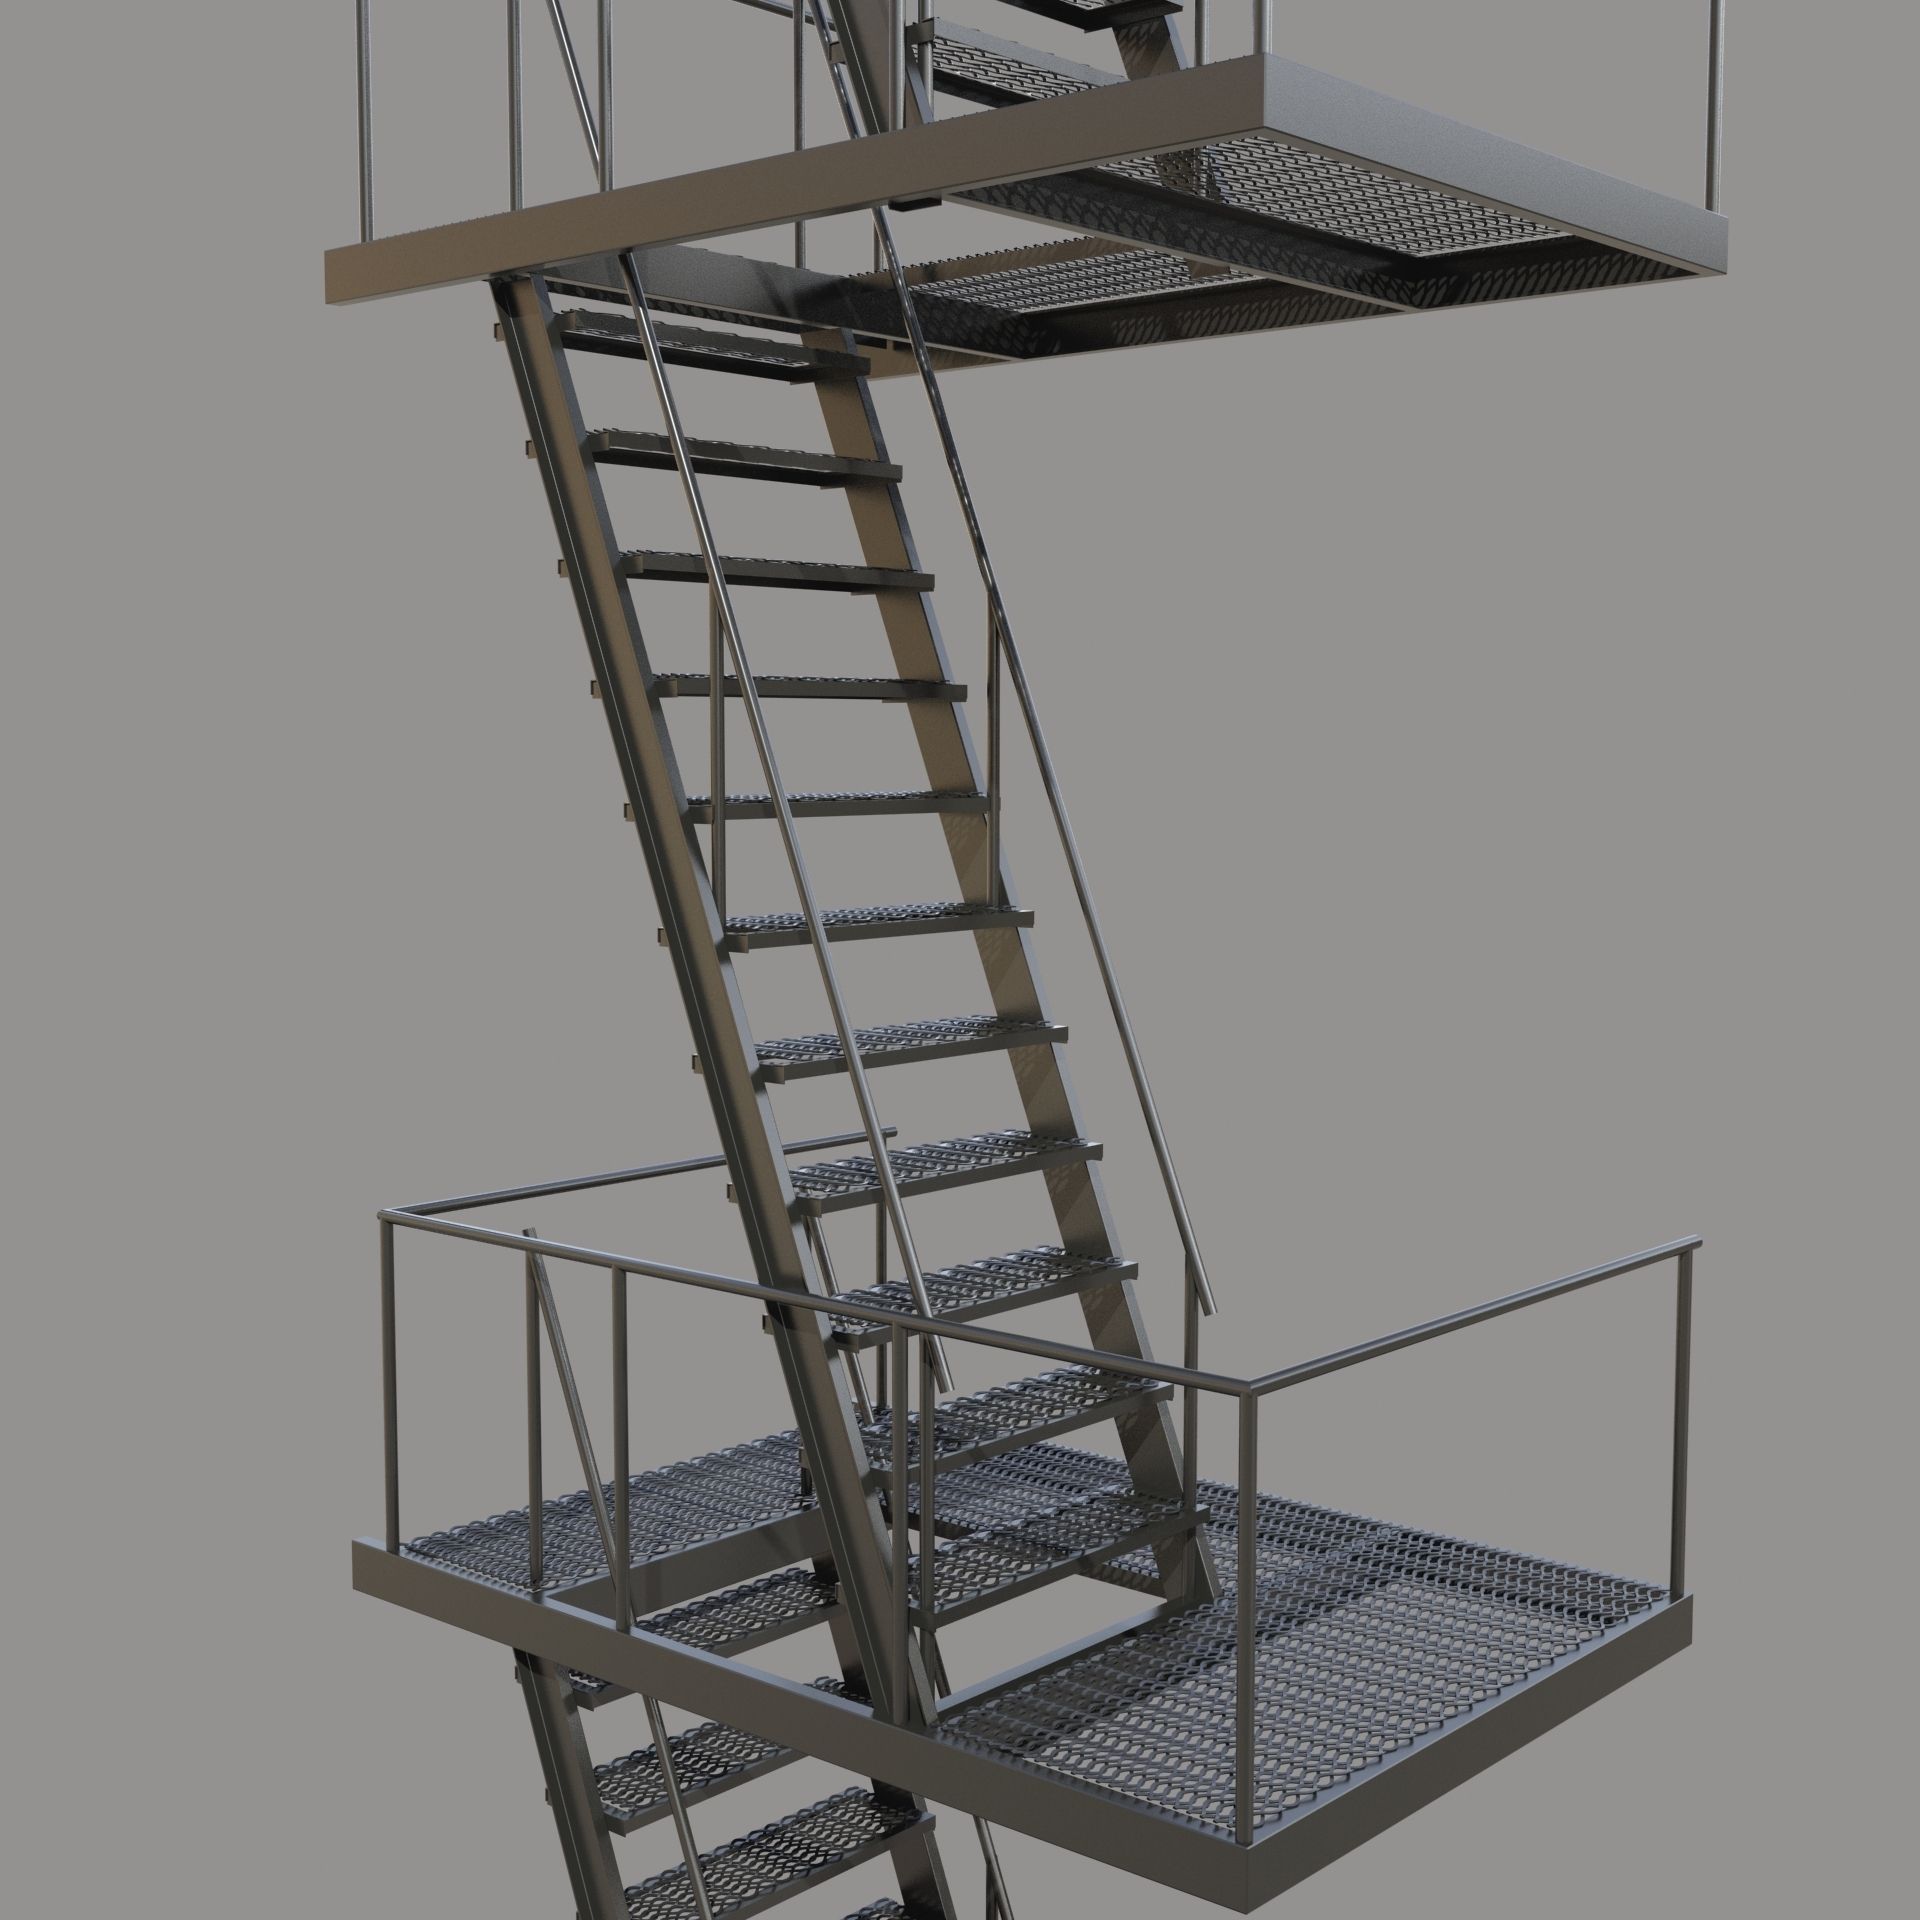 3D model Fire Escape Stair | CGTrader